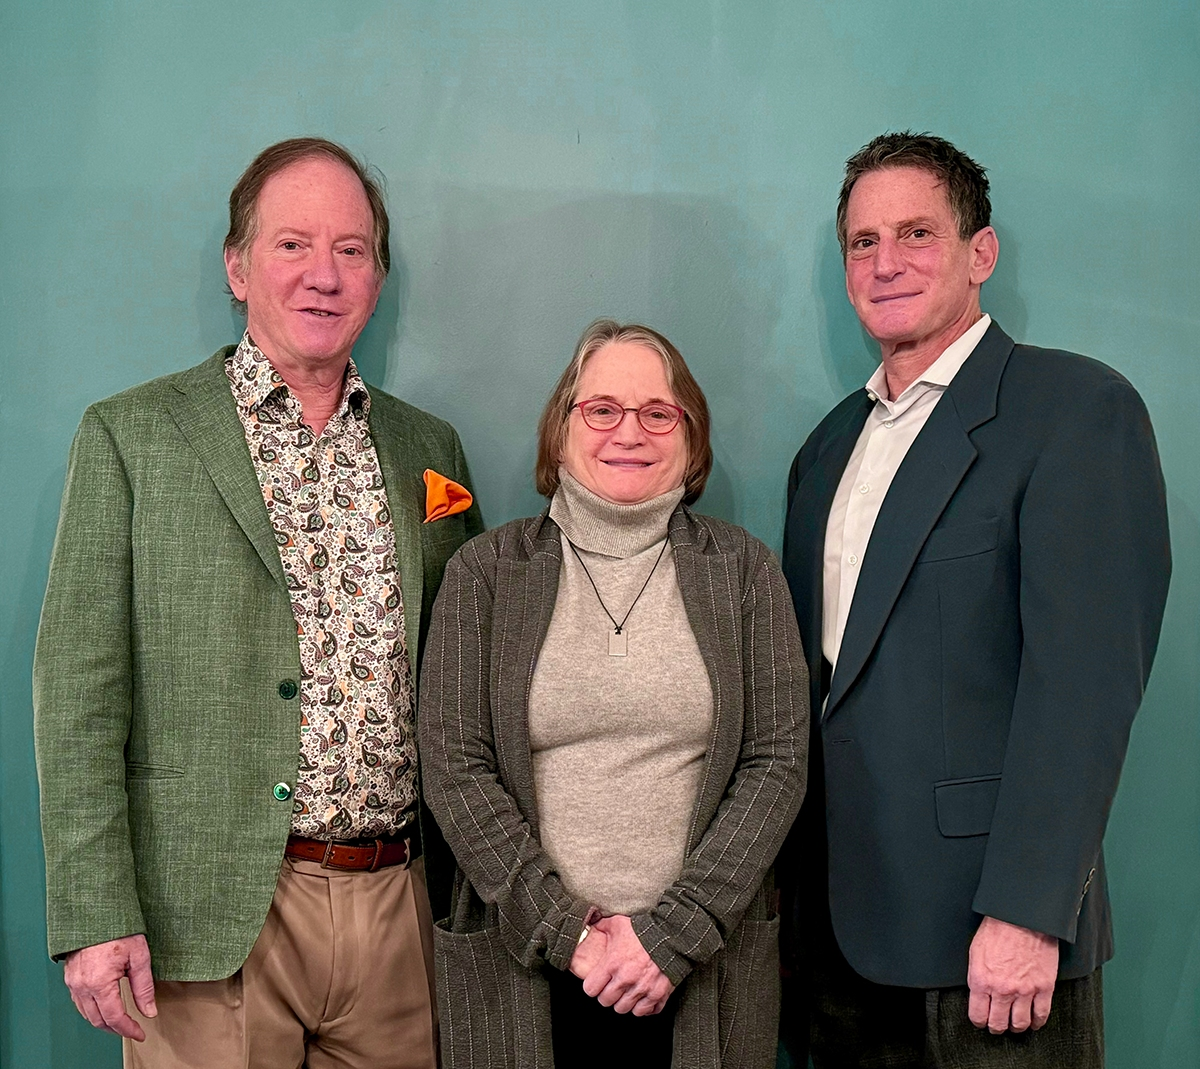 Pictured from left to right are Psychological Associates co-owners Jeff, Cindy, and Brad Lefton.